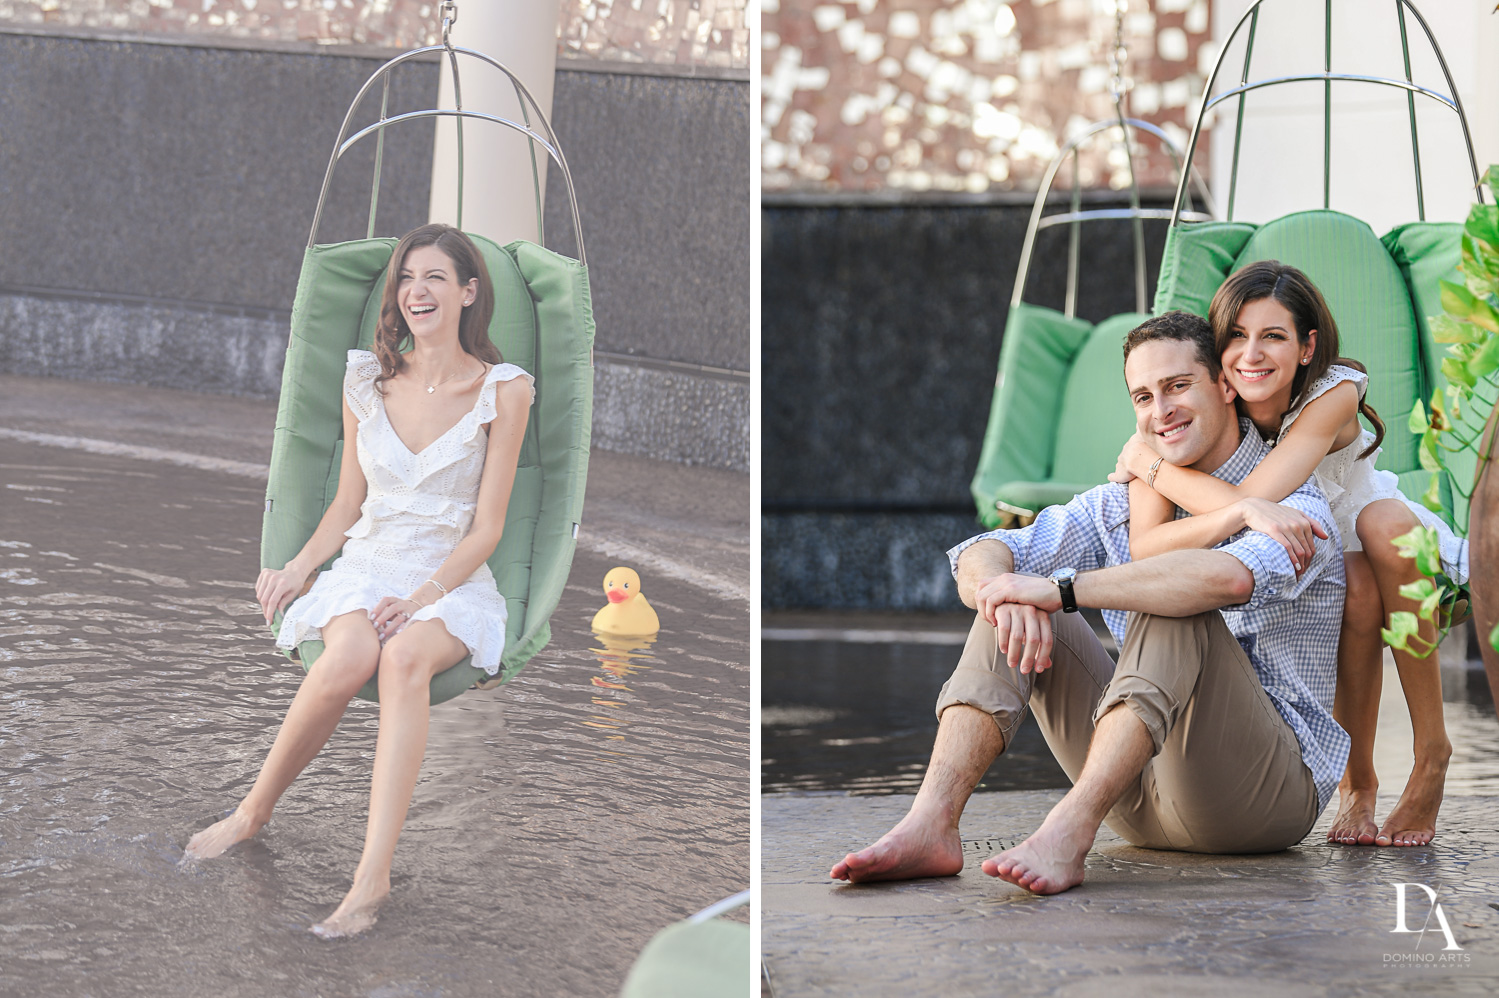 Beach-side Engagement Photography at Eau Palm Beach Resort & Spa by Domino Arts Photography